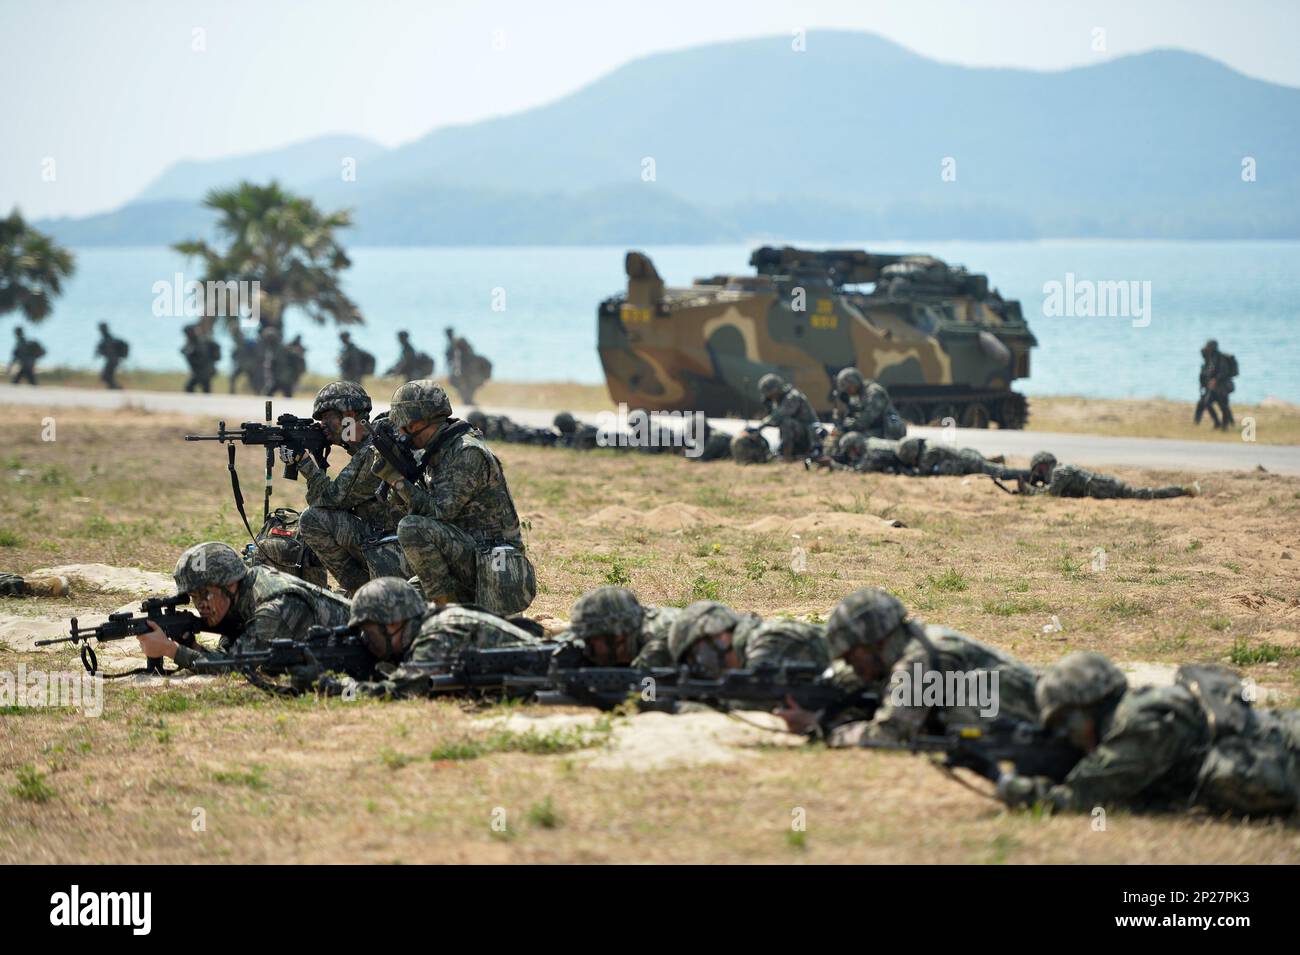 Chonburi, Thailand. 3rd Mar, 2023. Military personnel participate in amphibious exercise during the multinational exercise Cobra Gold 2023 in Chonburi province, Thailand, March 3, 2023. The Cobra Gold 2023 exercise, with the core exercises including command post exercise, humanitarian civic assistance, and field training exercise, will last until March 10. Credit: Rachen Sageamsak/Xinhua/Alamy Live News Stock Photo